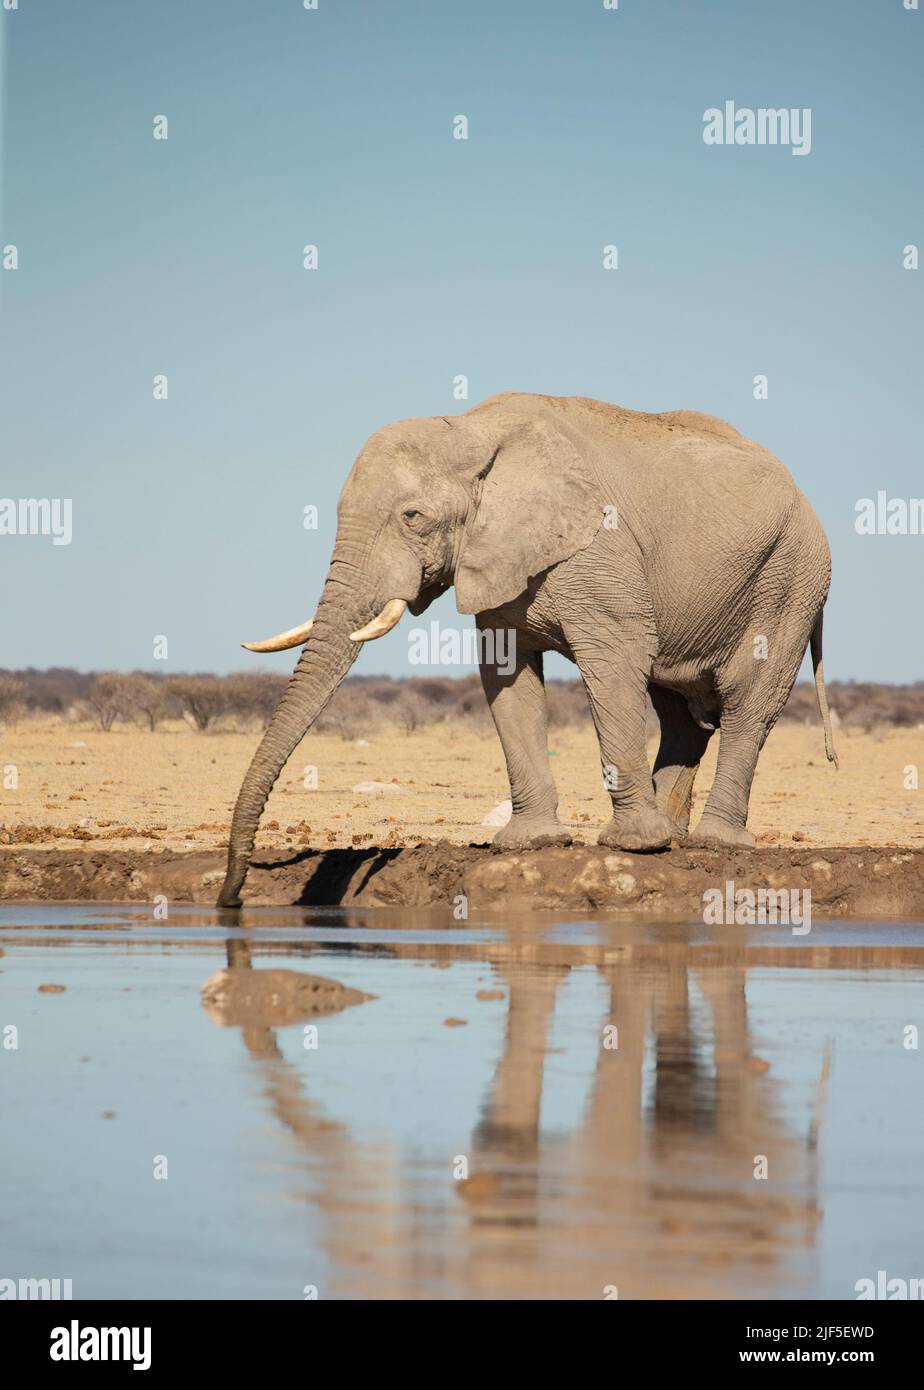 African Elephant (Loxodonta africana) at a water hole Stock Photo